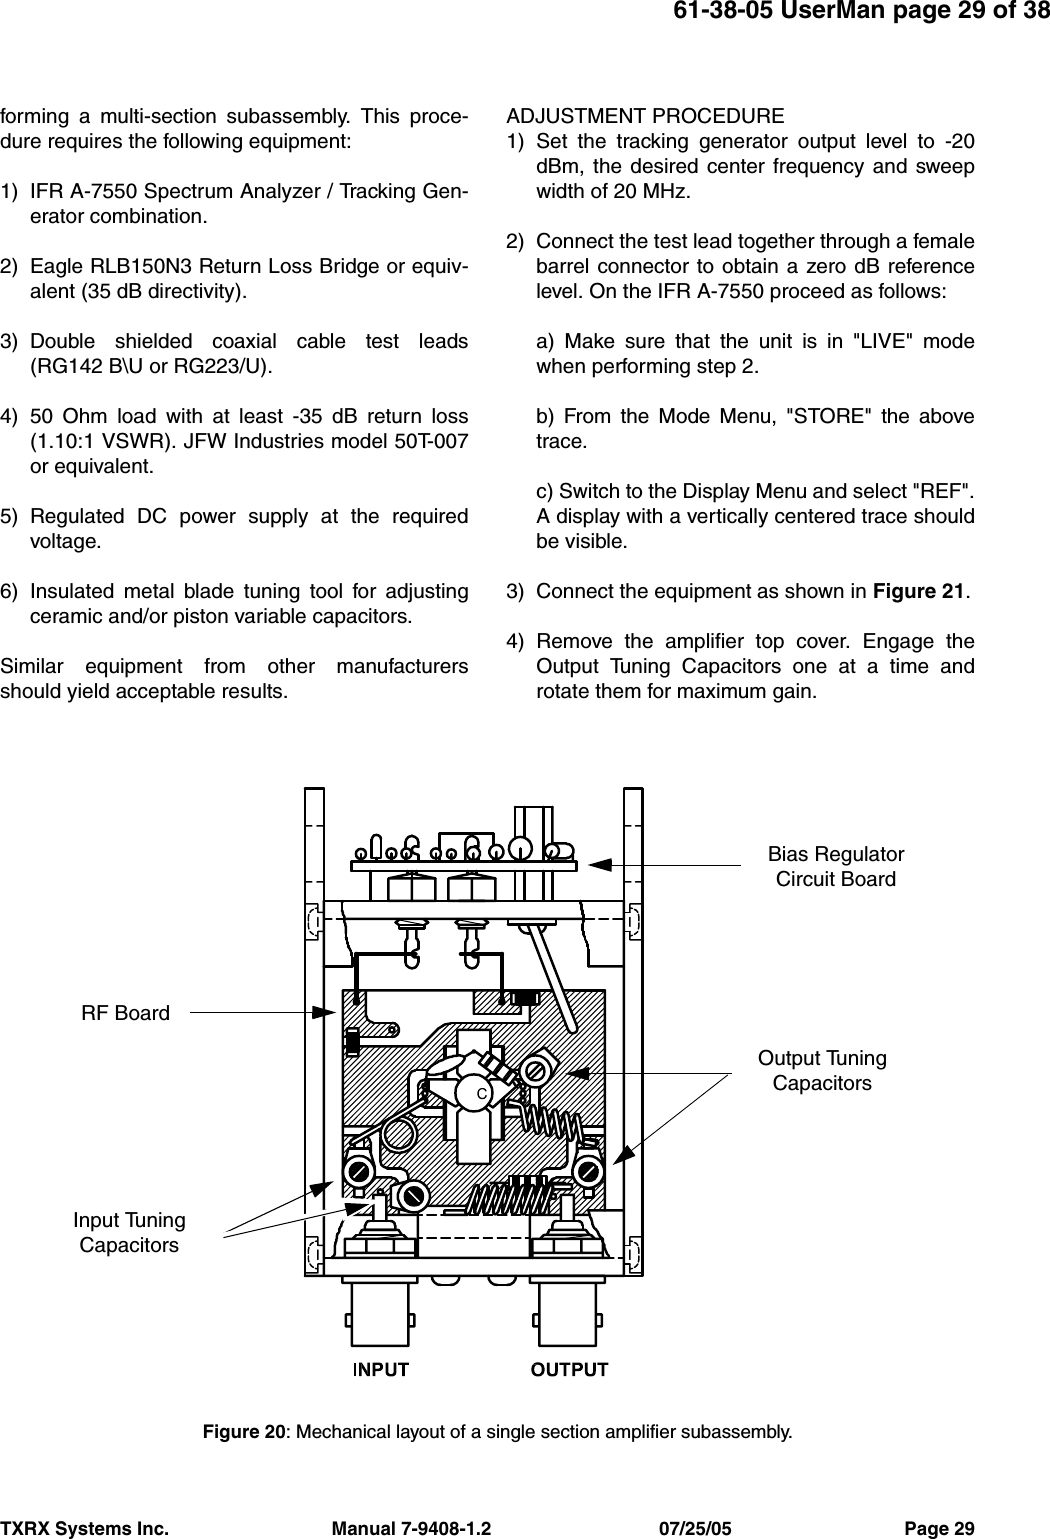 TXRX Systems Inc.                                Manual 7-9408-1.2                                 07/25/05                                  Page 2961-38-05 UserMan page 29 of 38forming a multi-section subassembly. This proce-dure requires the following equipment:1) IFR A-7550 Spectrum Analyzer / Tracking Gen-erator combination.2) Eagle RLB150N3 Return Loss Bridge or equiv-alent (35 dB directivity).3) Double shielded coaxial cable test leads(RG142 B\U or RG223/U).4) 50 Ohm load with at least -35 dB return loss(1.10:1 VSWR). JFW Industries model 50T-007or equivalent.5) Regulated DC power supply at the requiredvoltage.6) Insulated metal blade tuning tool for adjustingceramic and/or piston variable capacitors.Similar equipment from other manufacturersshould yield acceptable results.ADJUSTMENT PROCEDURE1) Set the tracking generator output level to -20dBm, the desired center frequency and sweepwidth of 20 MHz.2) Connect the test lead together through a femalebarrel connector to obtain a zero dB referencelevel. On the IFR A-7550 proceed as follows:a) Make sure that the unit is in &quot;LIVE&quot; modewhen performing step 2.b) From the Mode Menu, &quot;STORE&quot; the abovetrace.c) Switch to the Display Menu and select &quot;REF&quot;.A display with a vertically centered trace shouldbe visible.3) Connect the equipment as shown in Figure 21.4) Remove the amplifier top cover. Engage theOutput Tuning Capacitors one at a time androtate them for maximum gain. Figure 20: Mechanical layout of a single section amplifier subassembly.Bias RegulatorCircuit BoardOutput TuningCapacitorsRF BoardInput TuningCapacitors